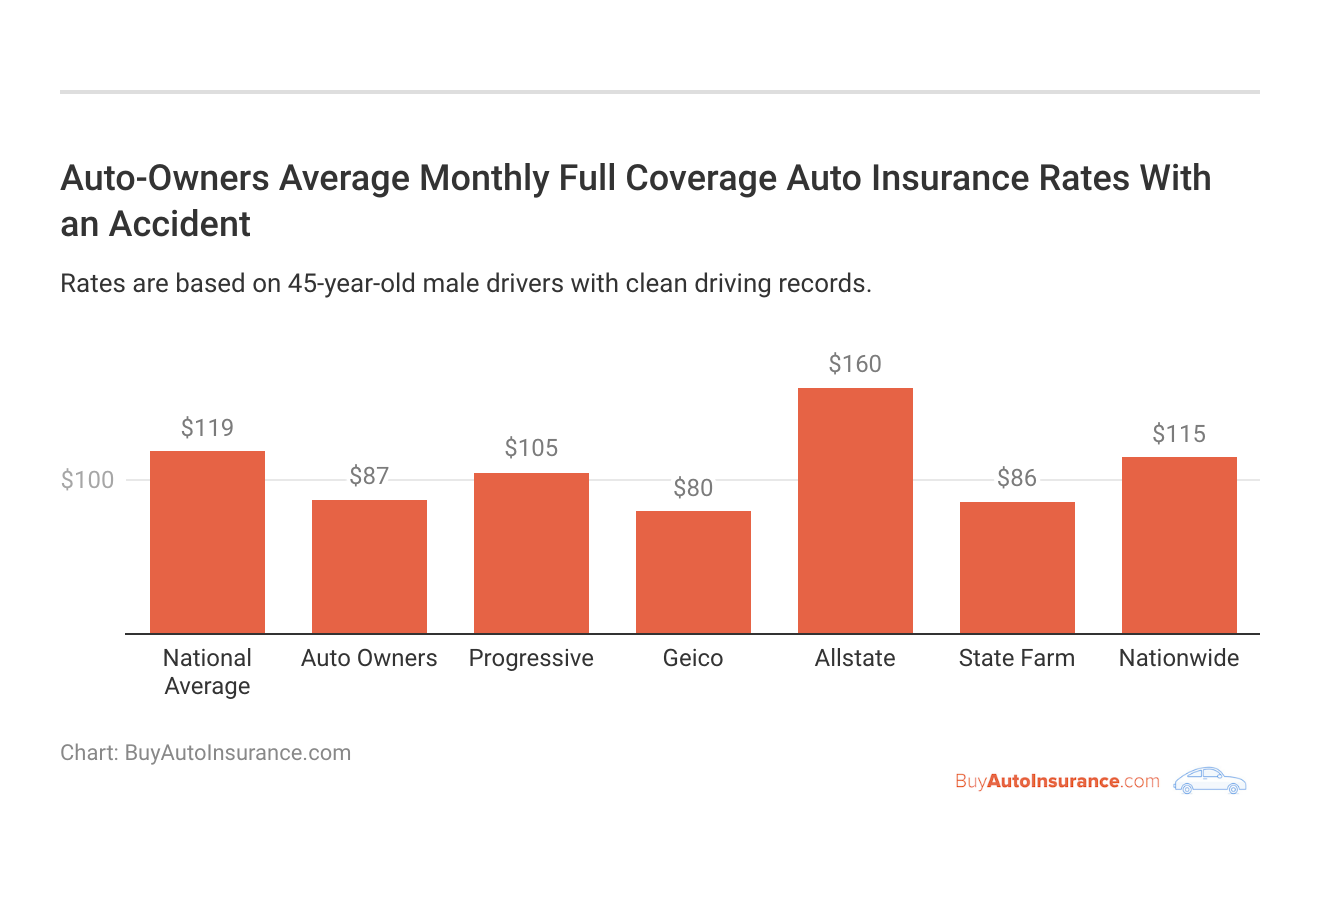 <h3>Auto-Owners Average Monthly Full Coverage Auto Insurance Rates With an Accident</h3>